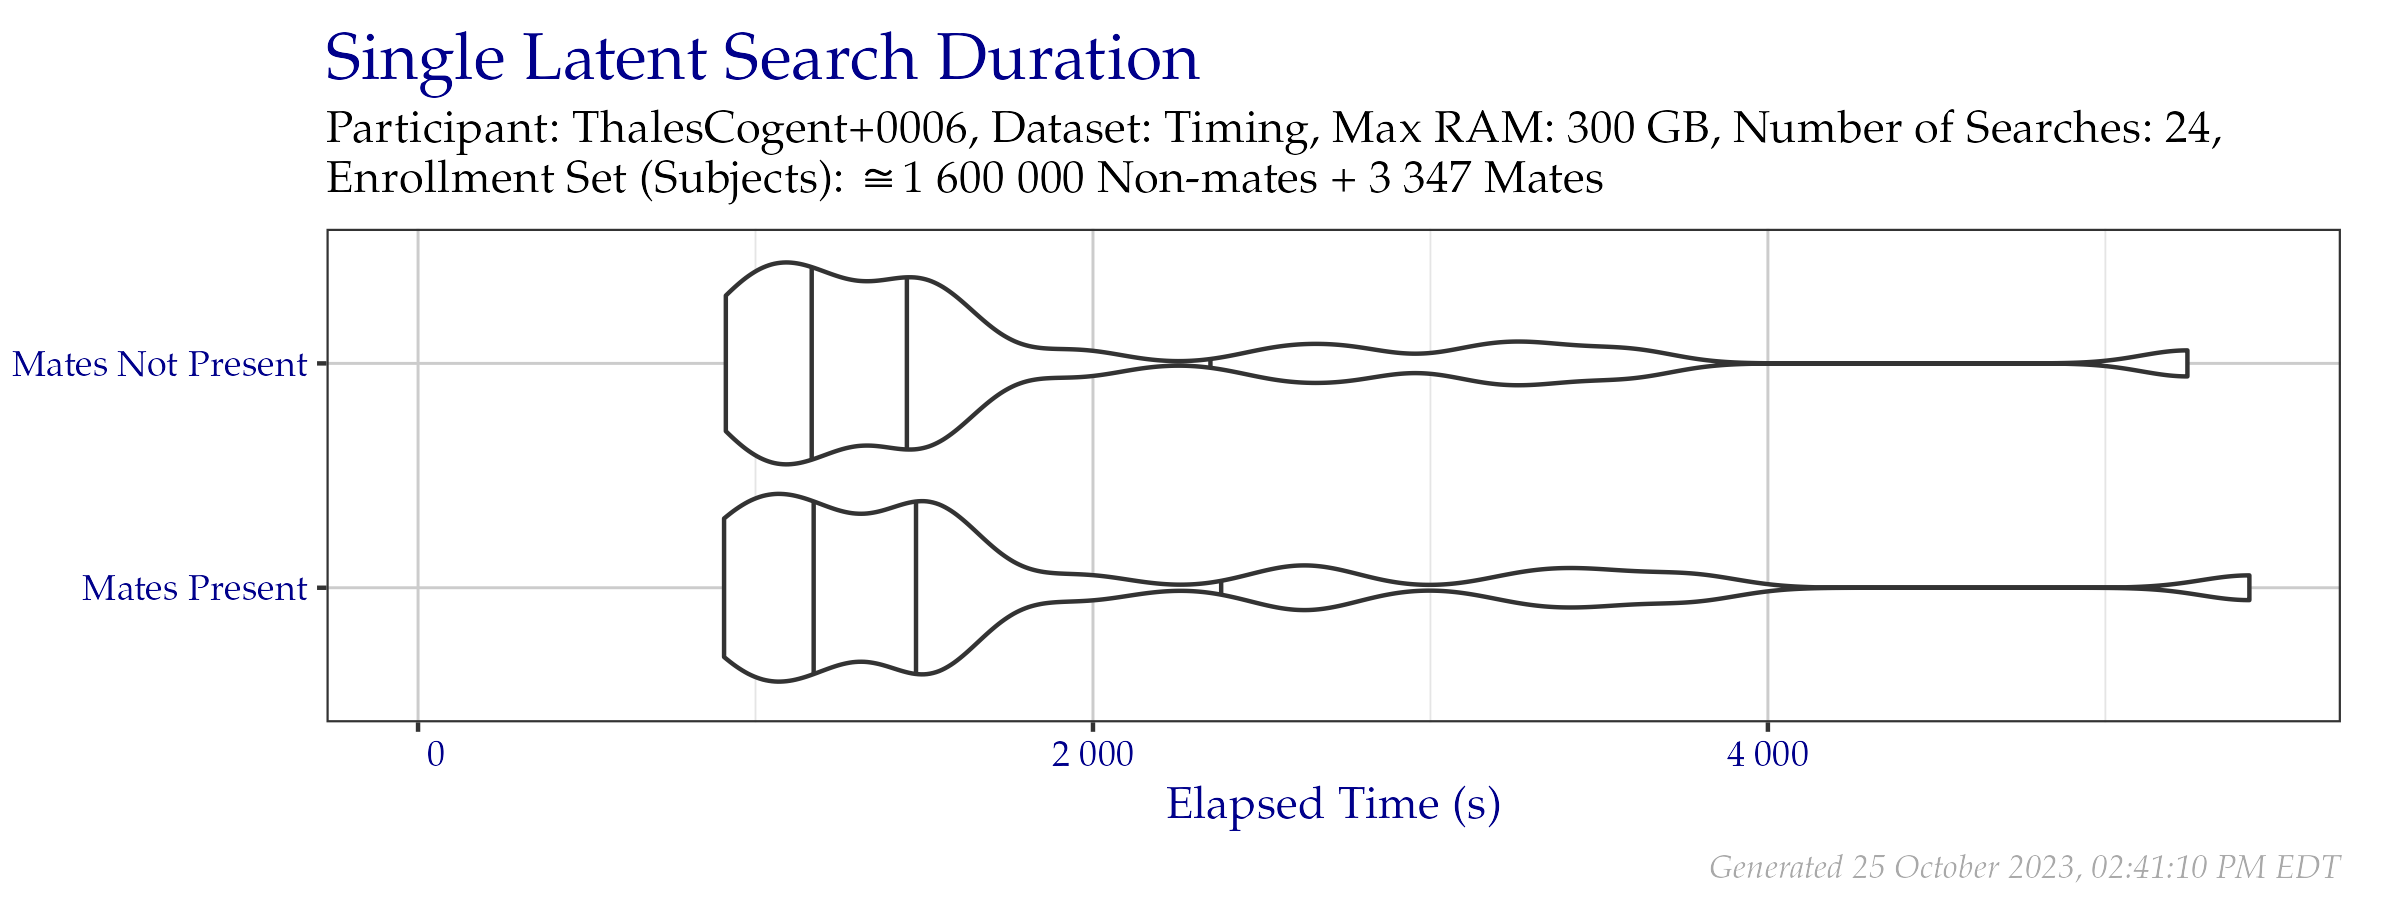 Violin plot of search time durations of the search probe set from the Timing Sample dataset. Vertical lines from left to right indicate the 25\%, 50\%, and 75\% quantiles respectively.